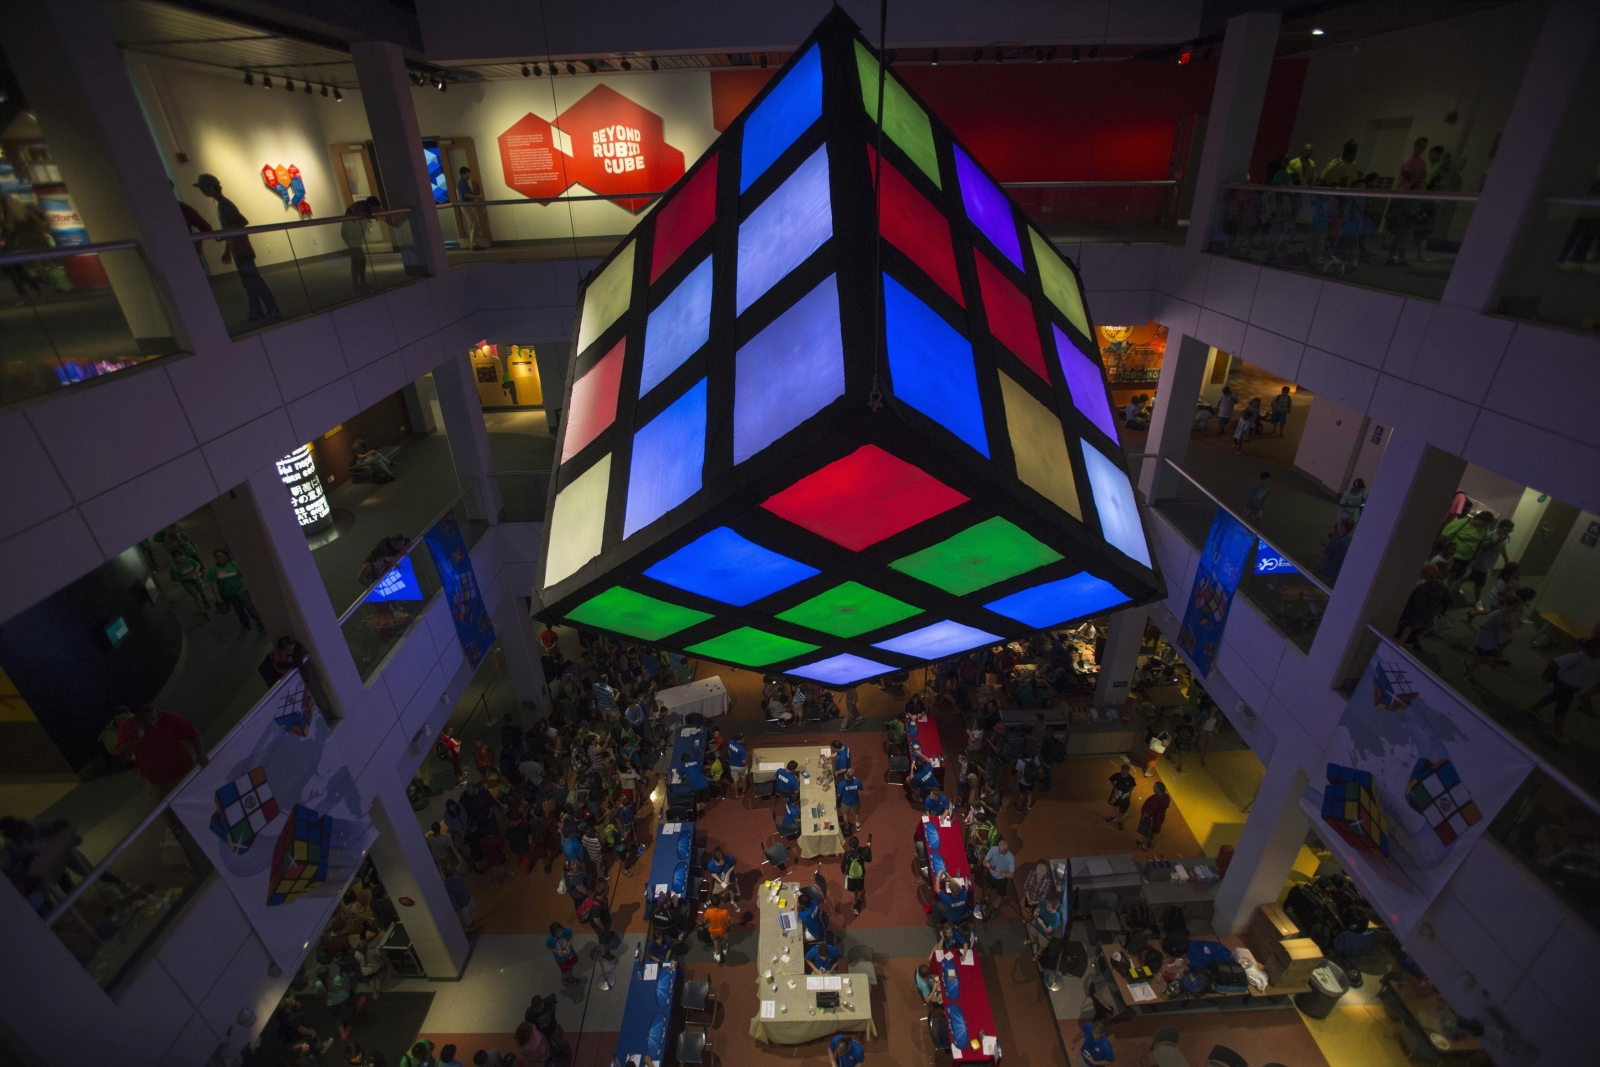 Rubik's Cube looks down over the crowd of participants